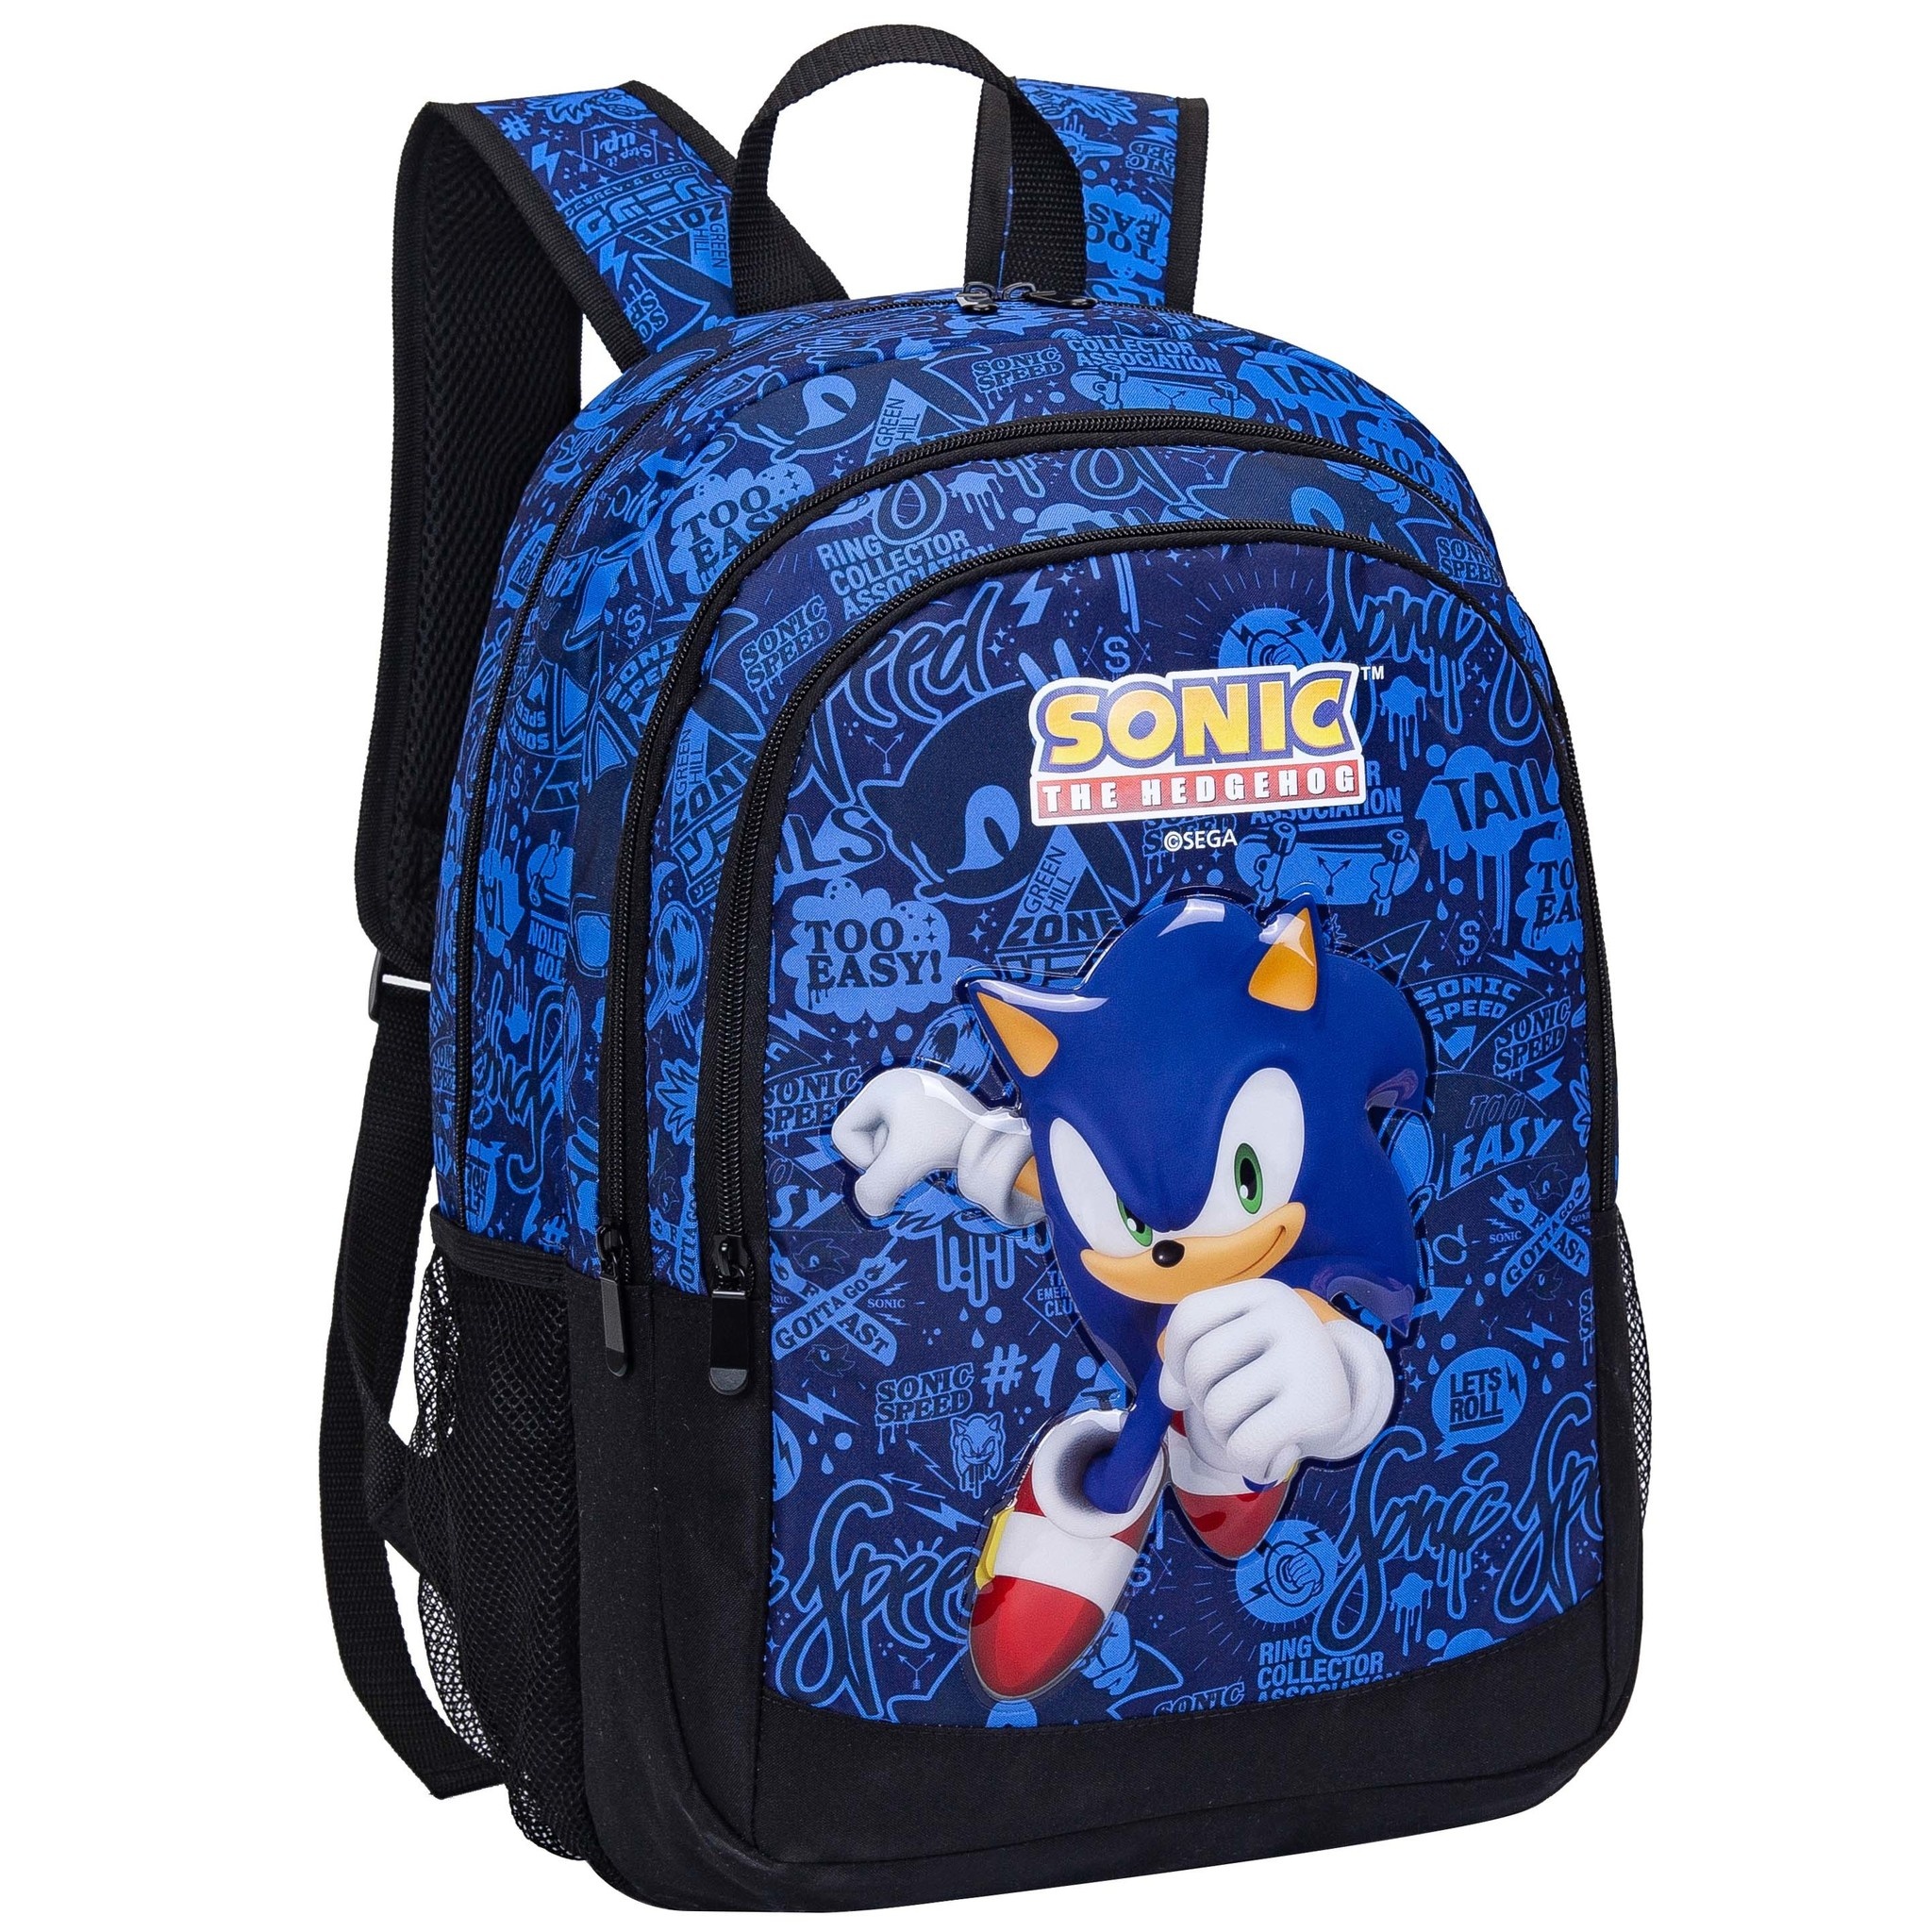 Sonic Backpack Let's Roll - 44 x 32 x 20 cm - Polyester